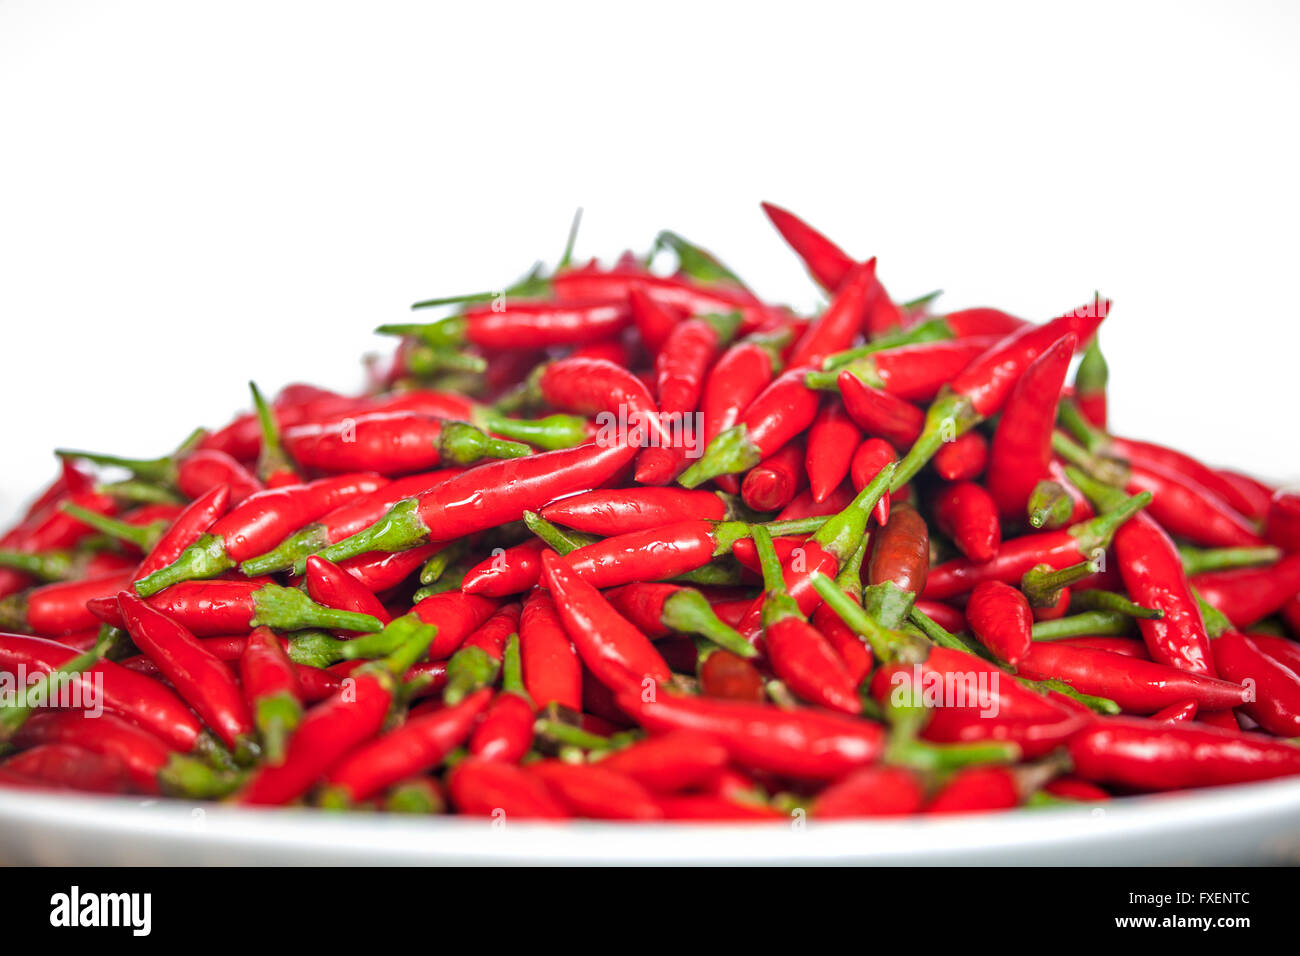 Plate of Thai red chilies on white background Stock Photo